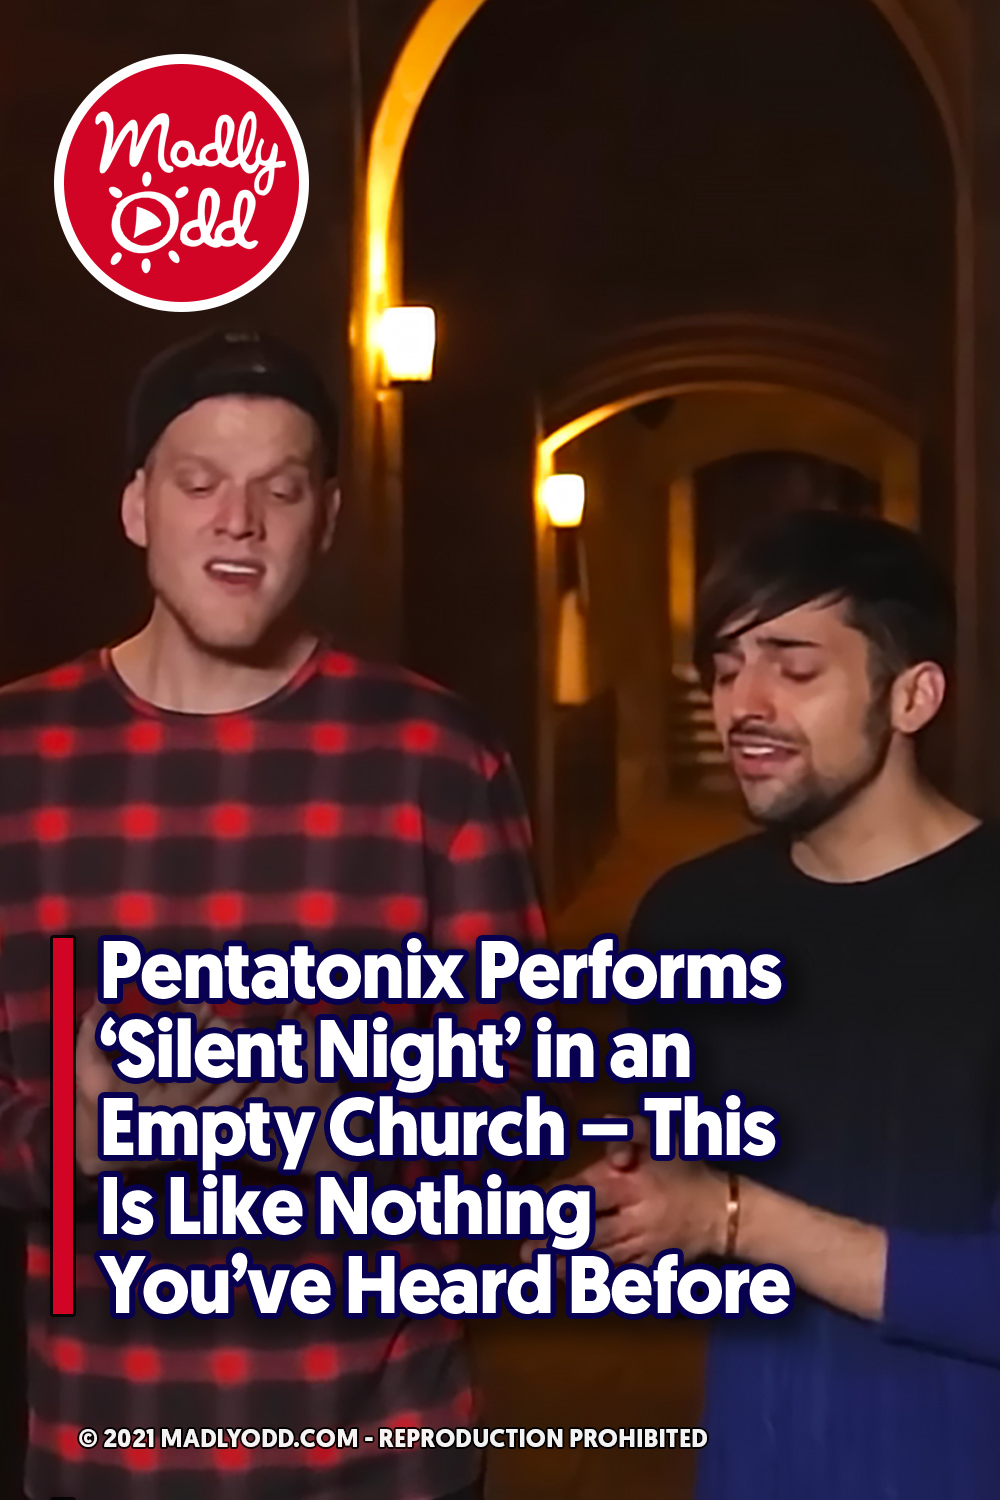 Pentatonix Performs \'Silent Night\' in an Empty Church - This Is Like Nothing You\'ve Heard Before